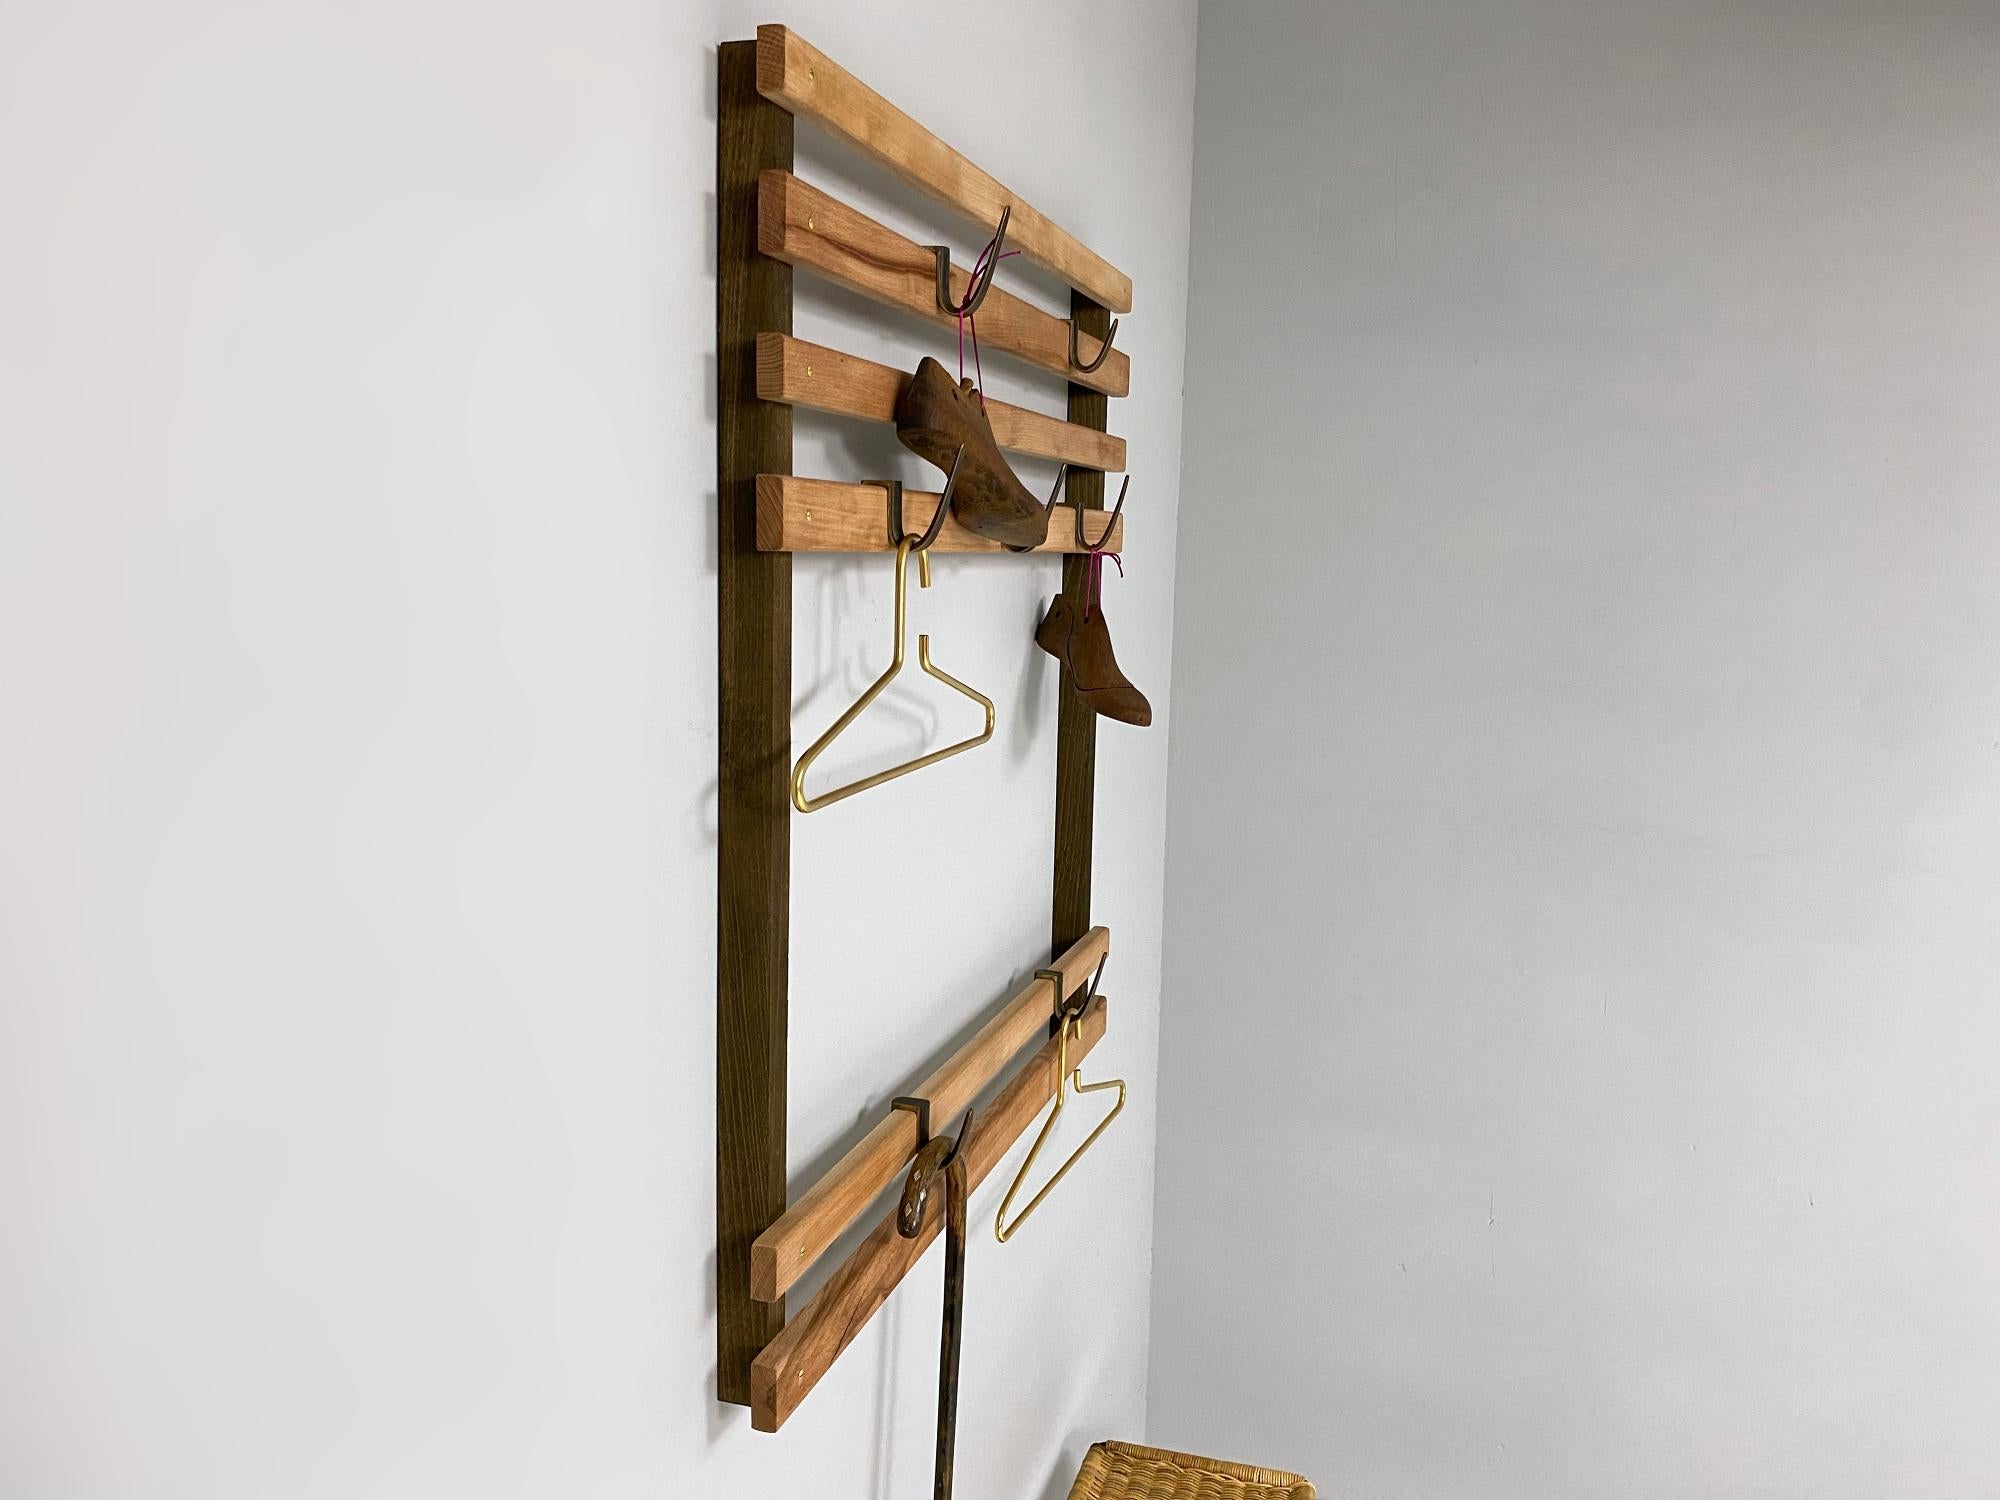 Hand-Crafted Carl Auböck Midcentury Wall Coat Rack #4547 & Seven Brass Hooks, 1960s, Austria For Sale